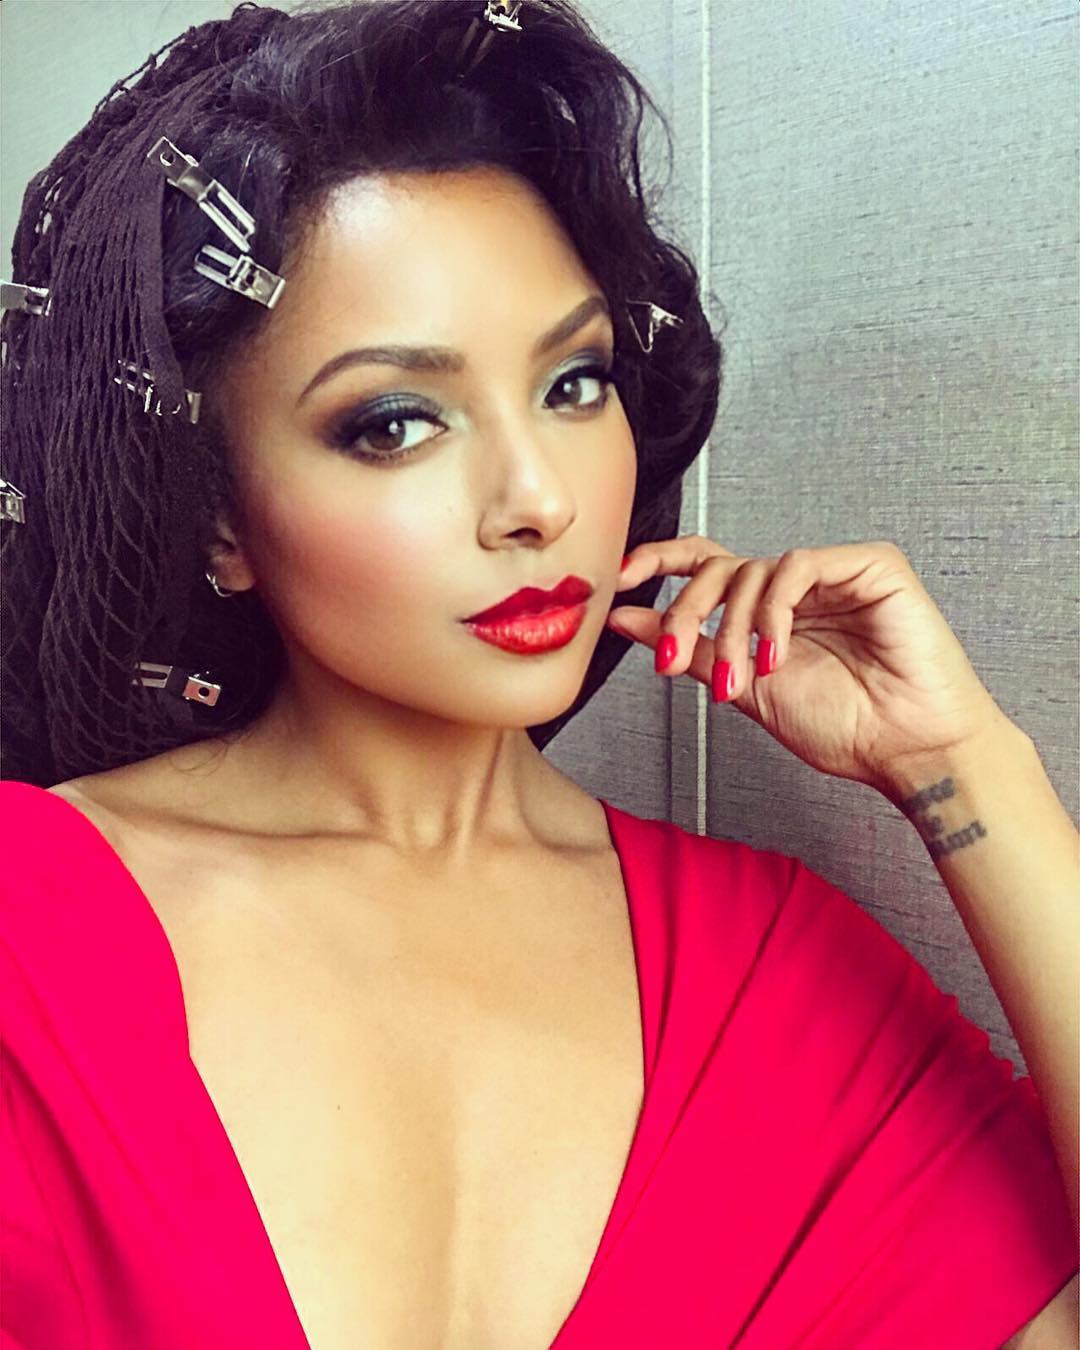 65+ Hot Pictures Of Kat Graham Which Are Stunningly Ravishing | Best Of Comic Books